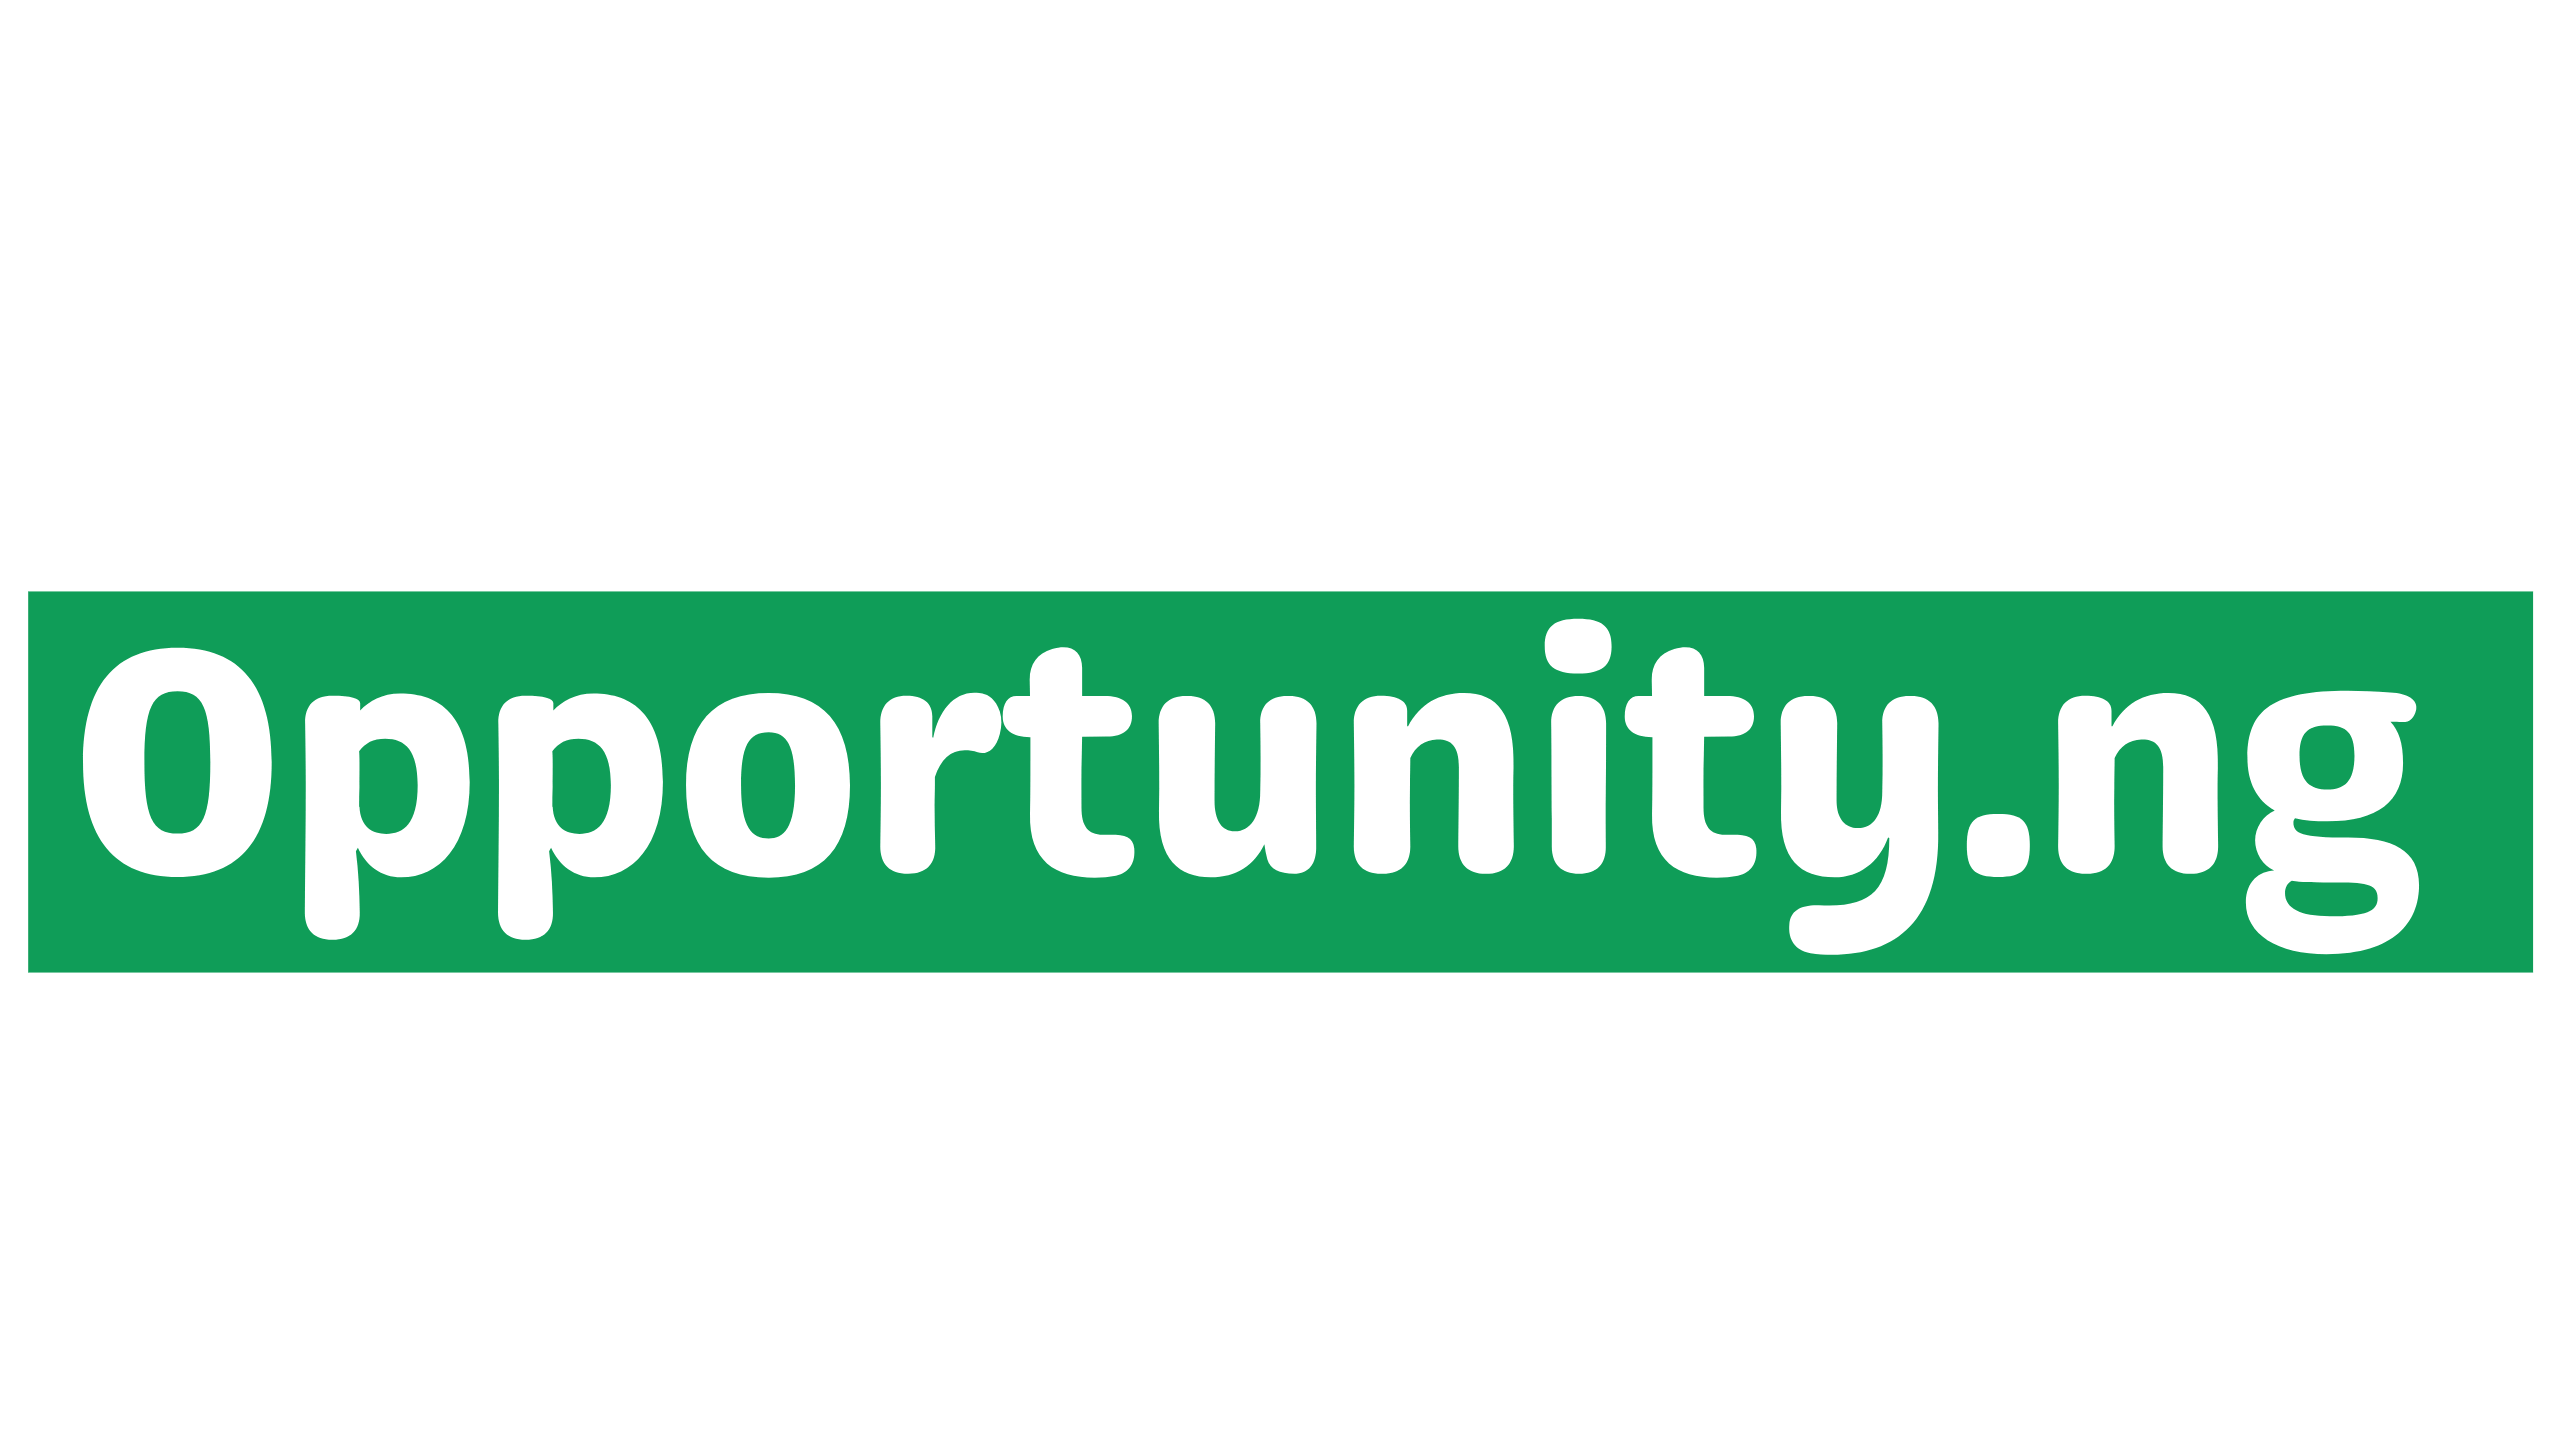 Opportunity.ng